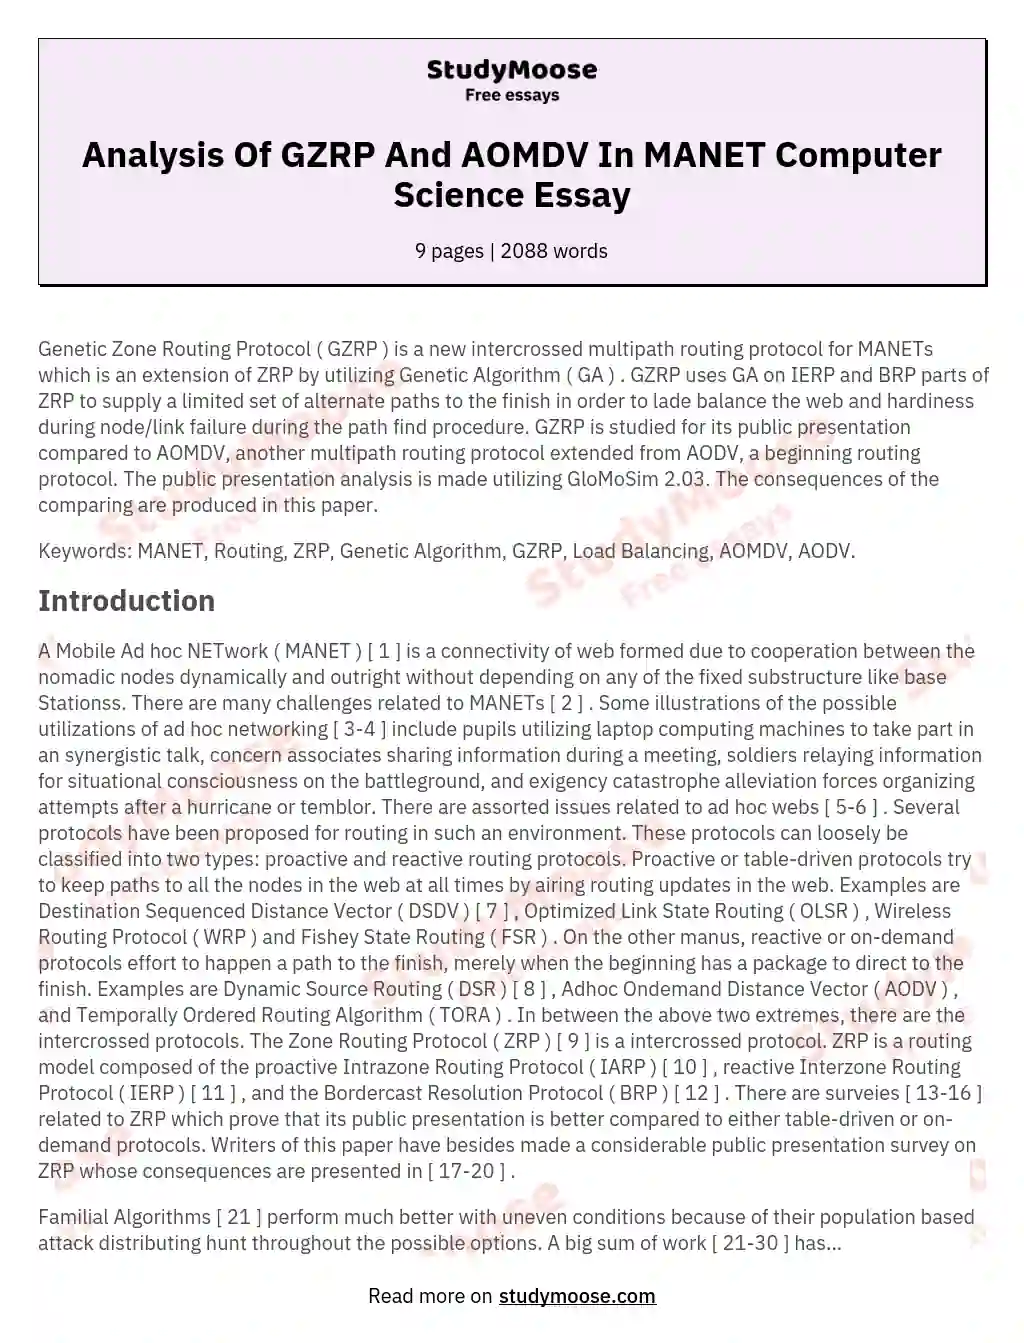 Analysis Of GZRP And AOMDV In MANET Computer Science Essay essay